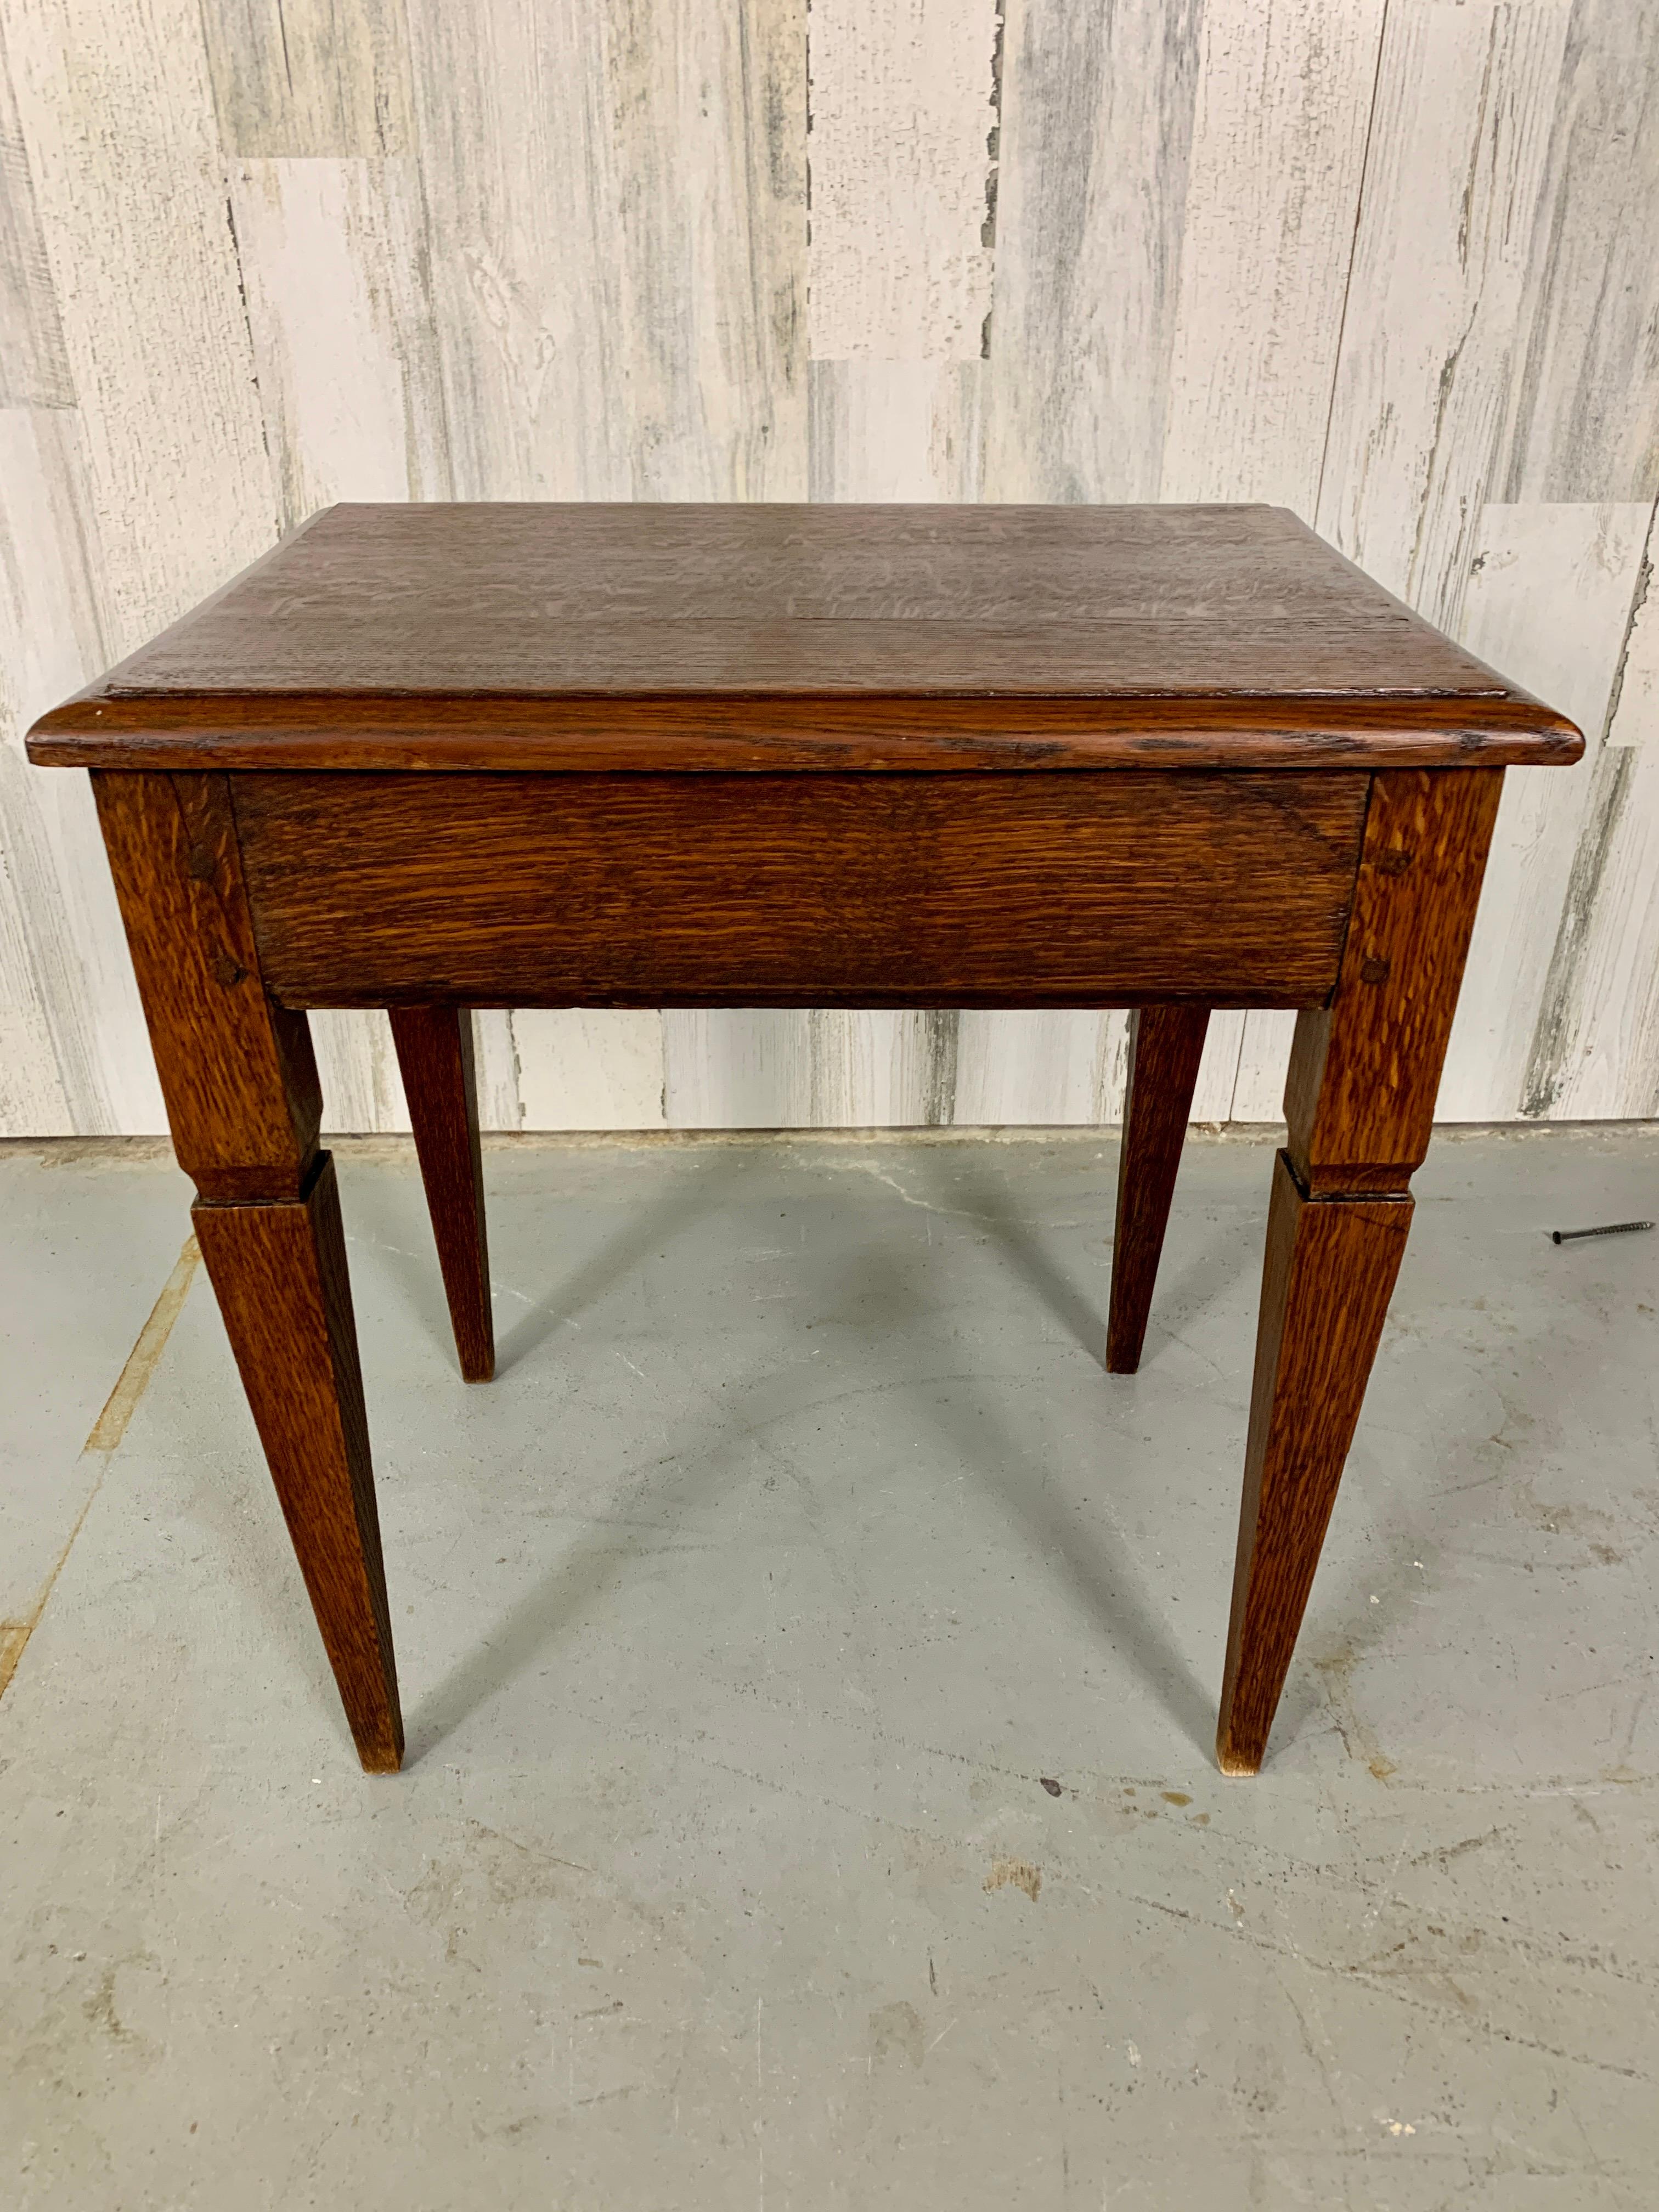 Antique French oak side table in the Directoire style with mortise and tenon joints.